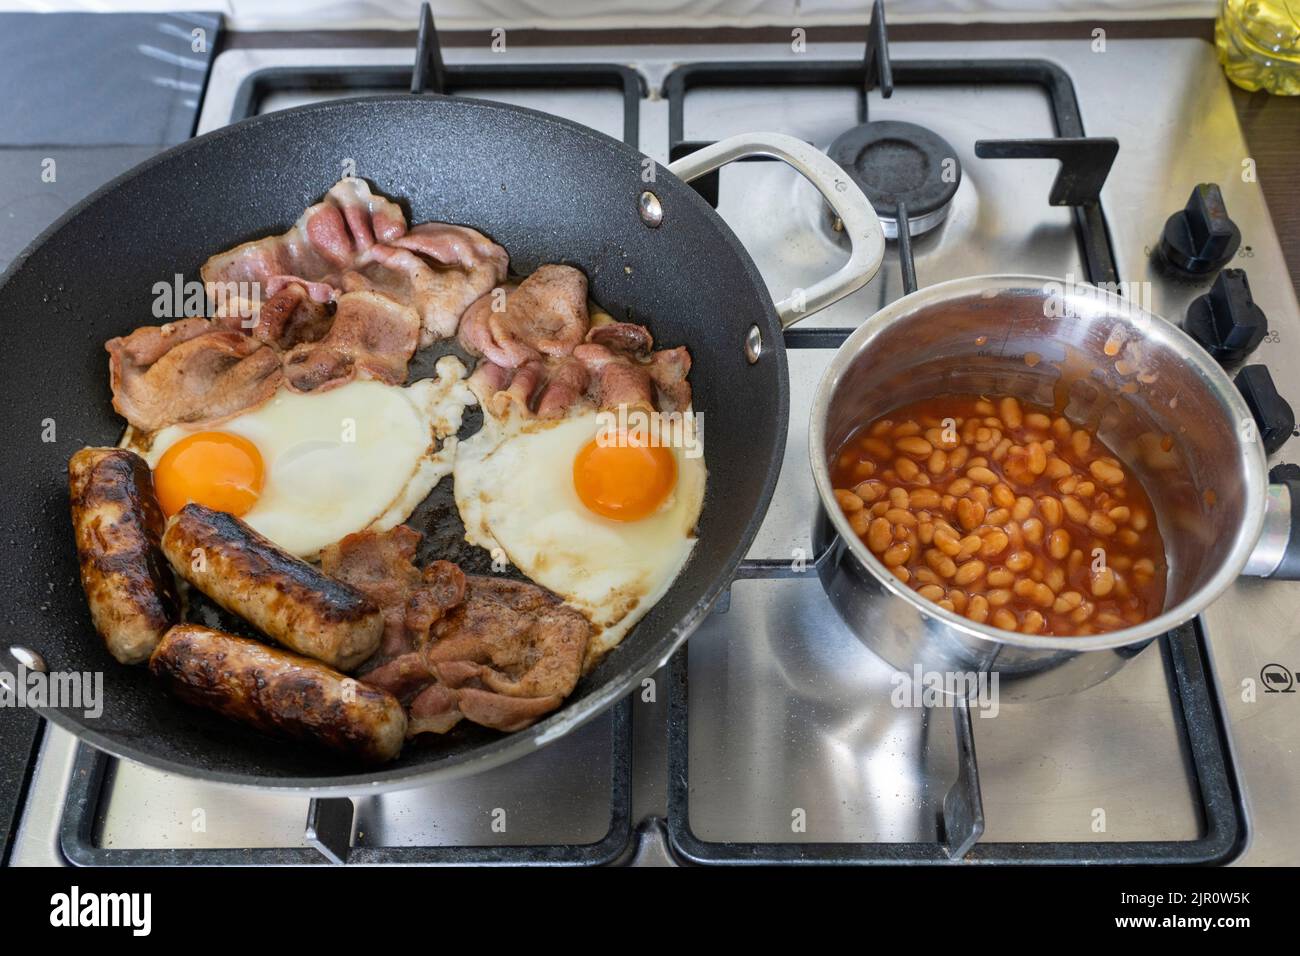 Traditional English breakfast ingredients cooking and frying on a gas hob. Bacon, eggs, sausages and baked beans.UK. Concept - fatty meal Stock Photo